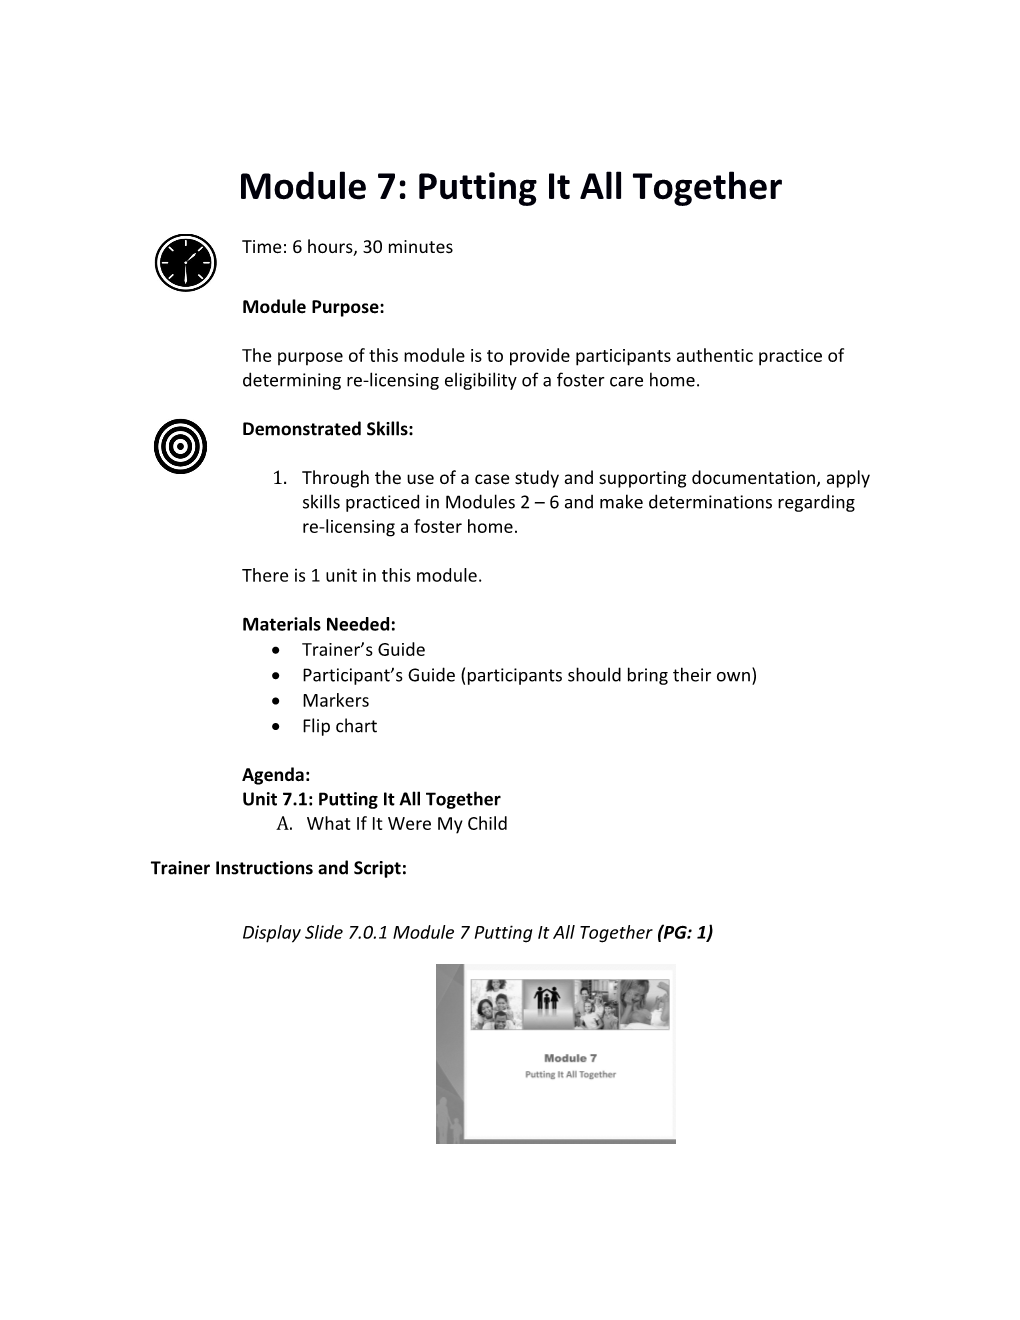 Module 7: Putting It All Together